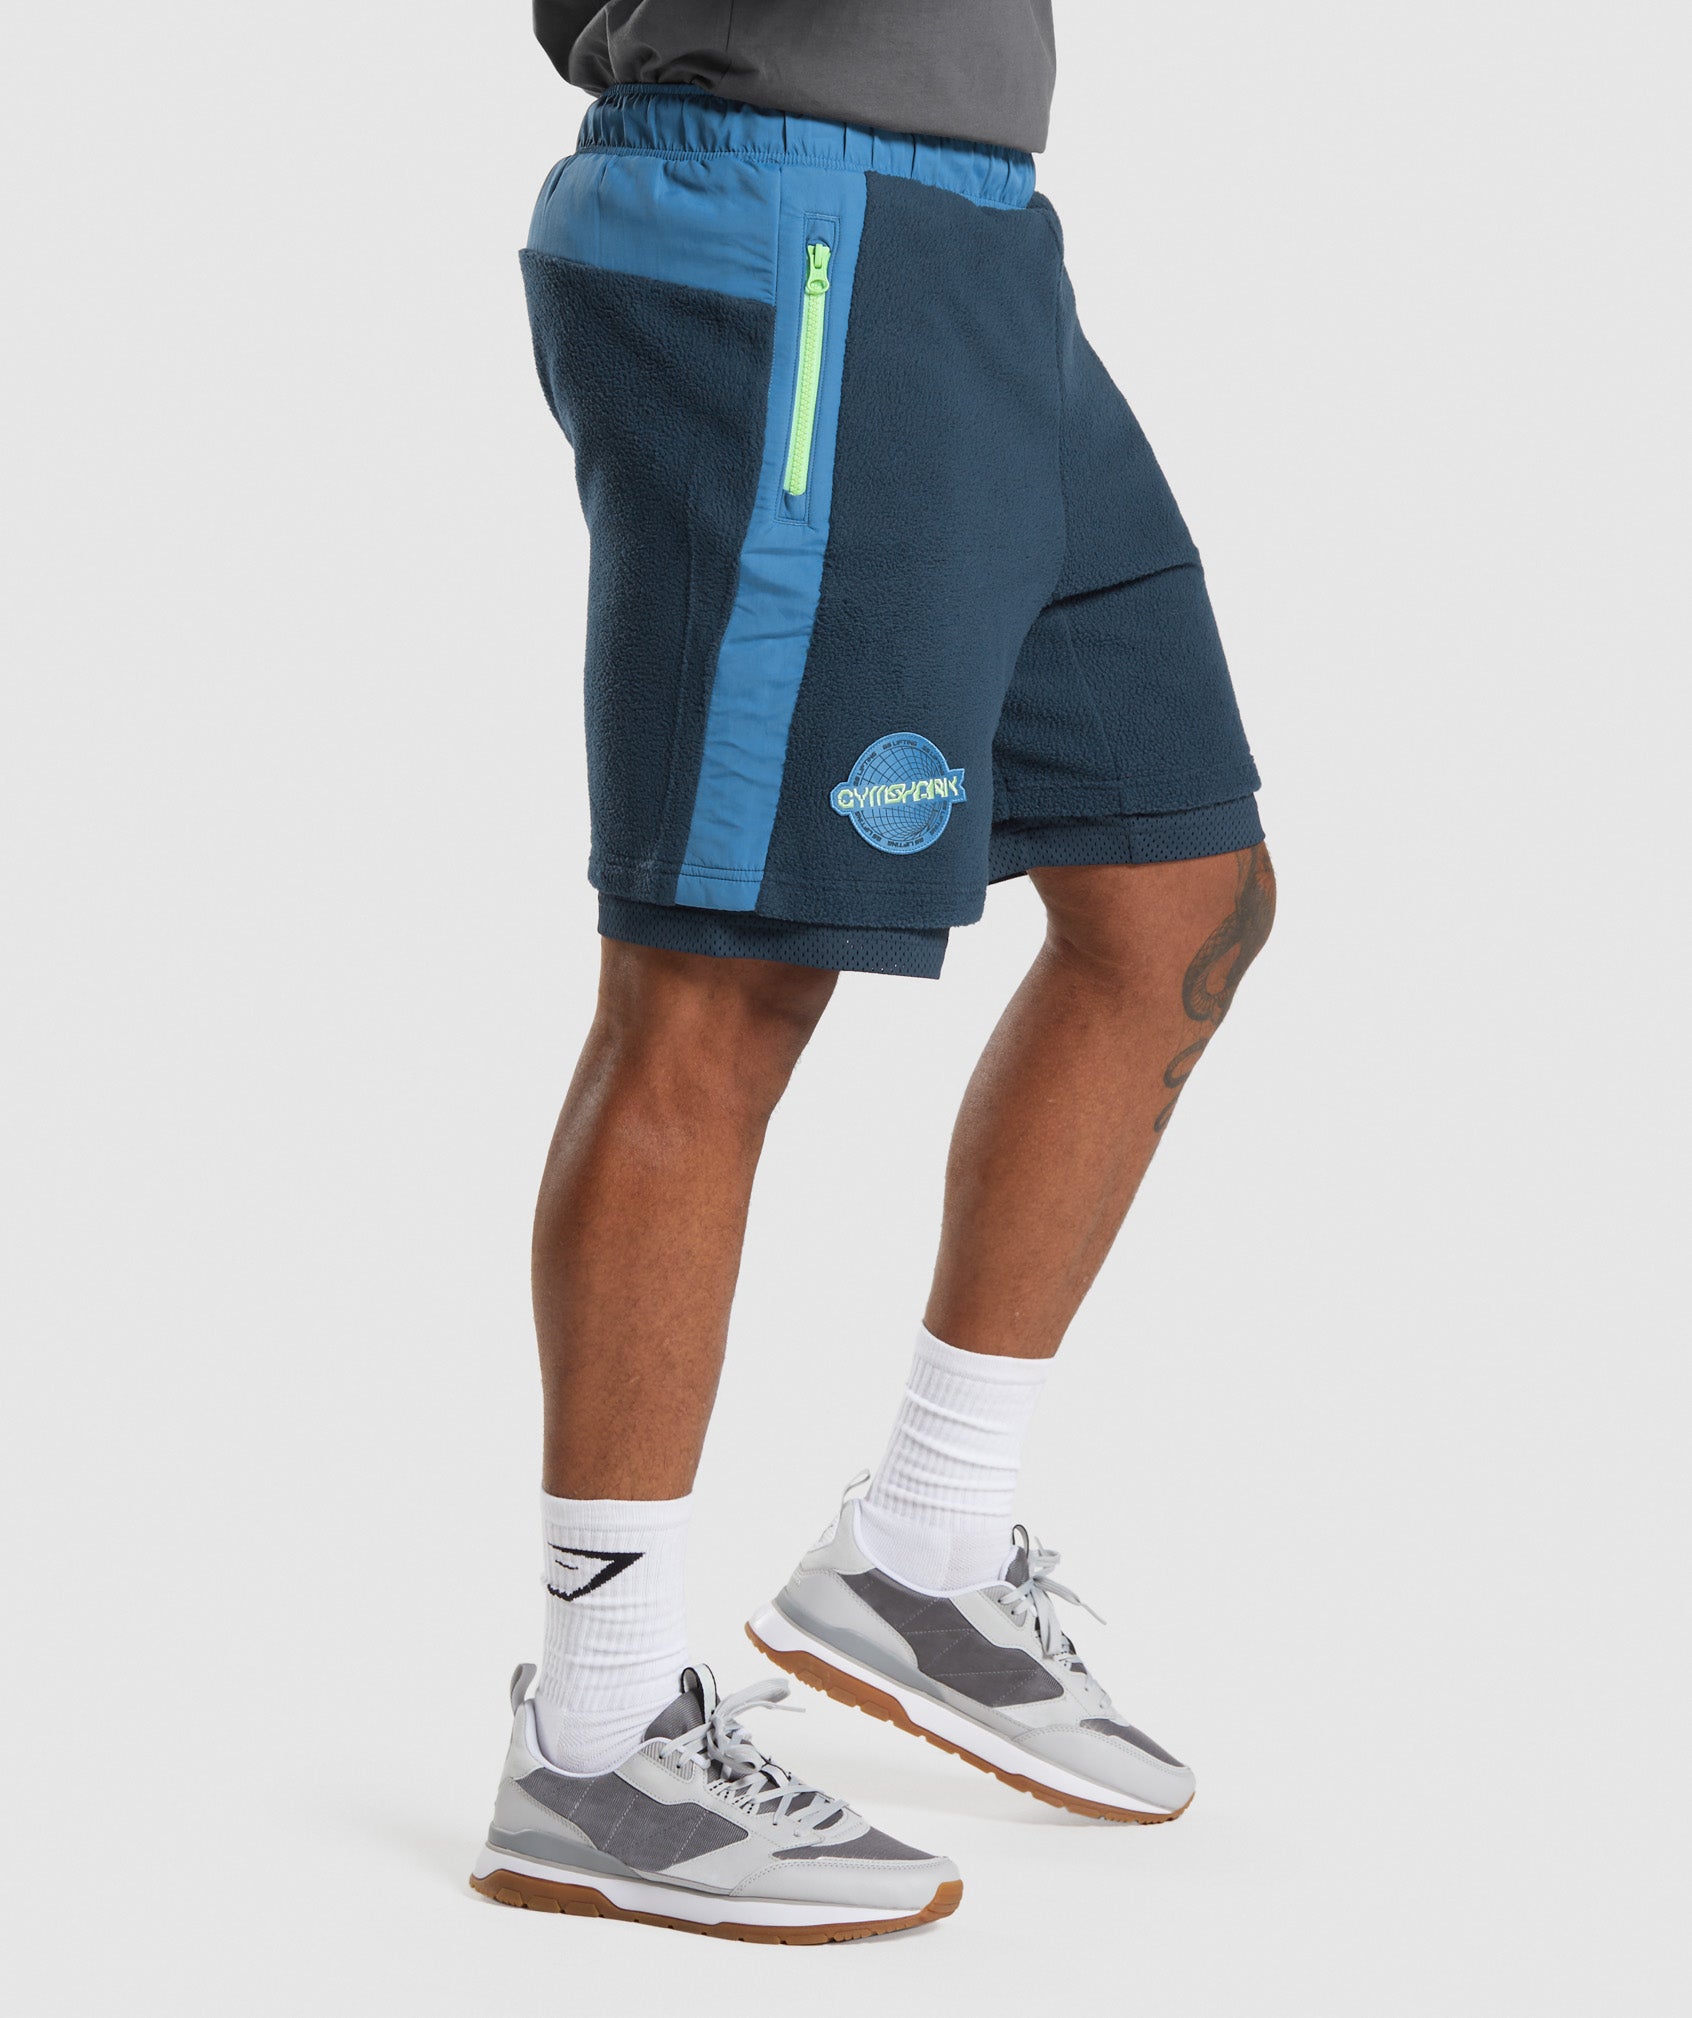 Vibes Shorts in Navy/Lakeside Blue - view 3